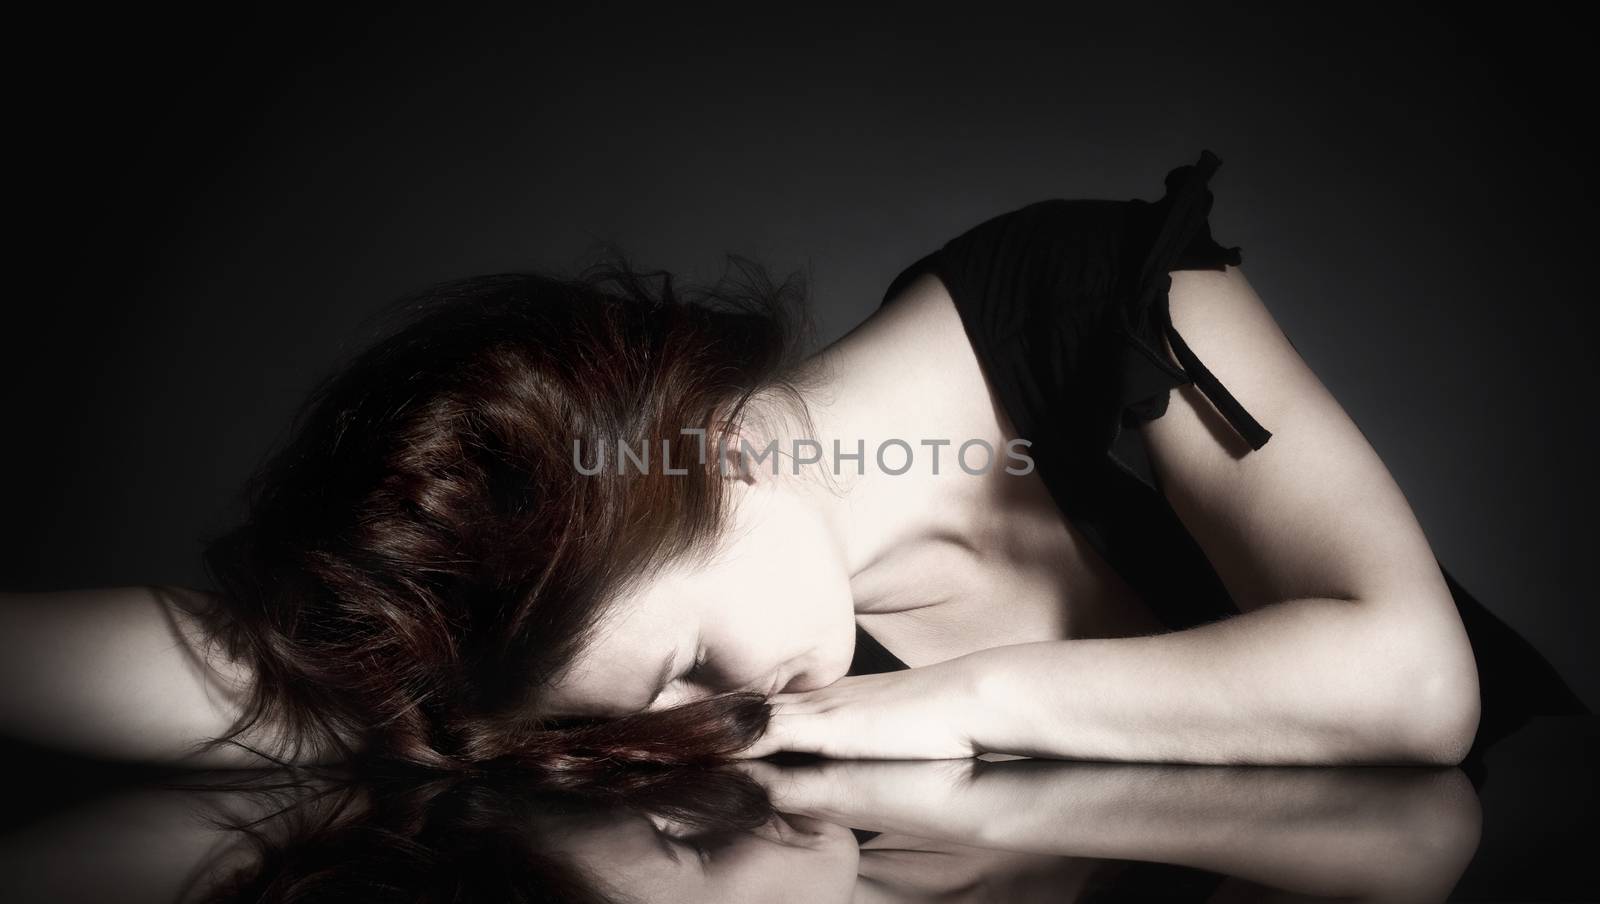 Romantic Image of a Woman with Closed Eyes Dreaming